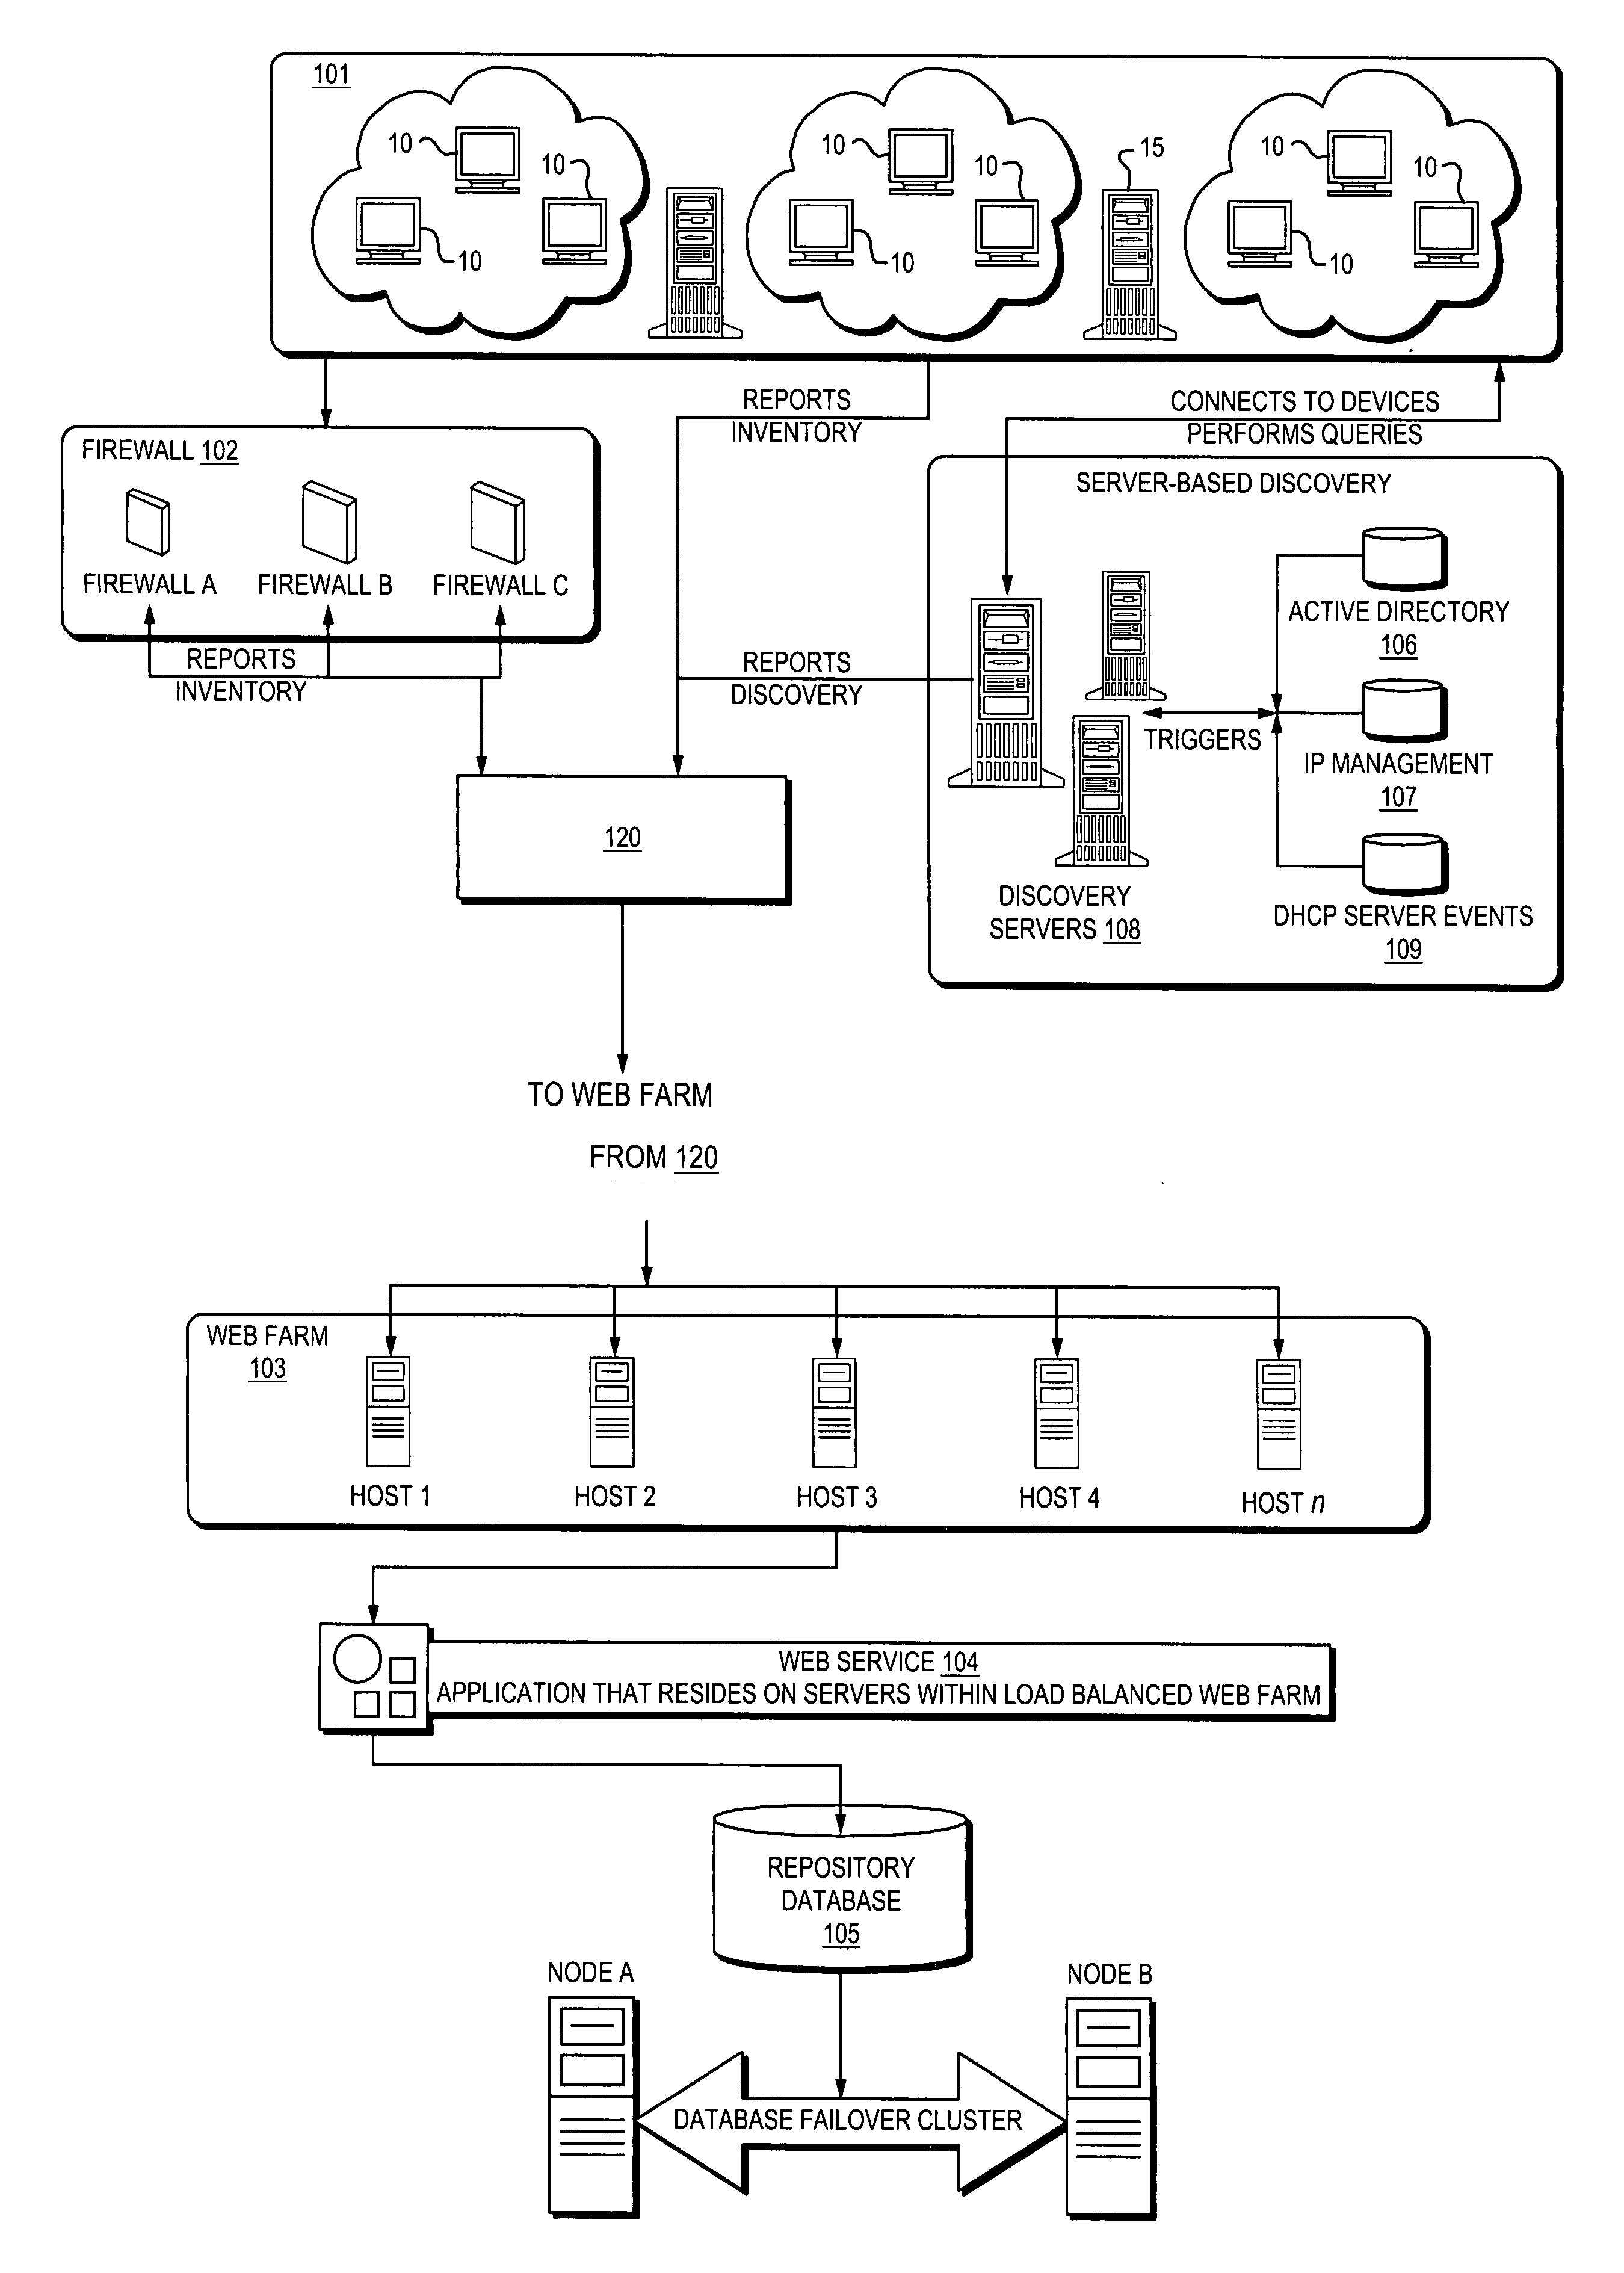 Method and system for identifying and conducting inventory of computer assets on a network